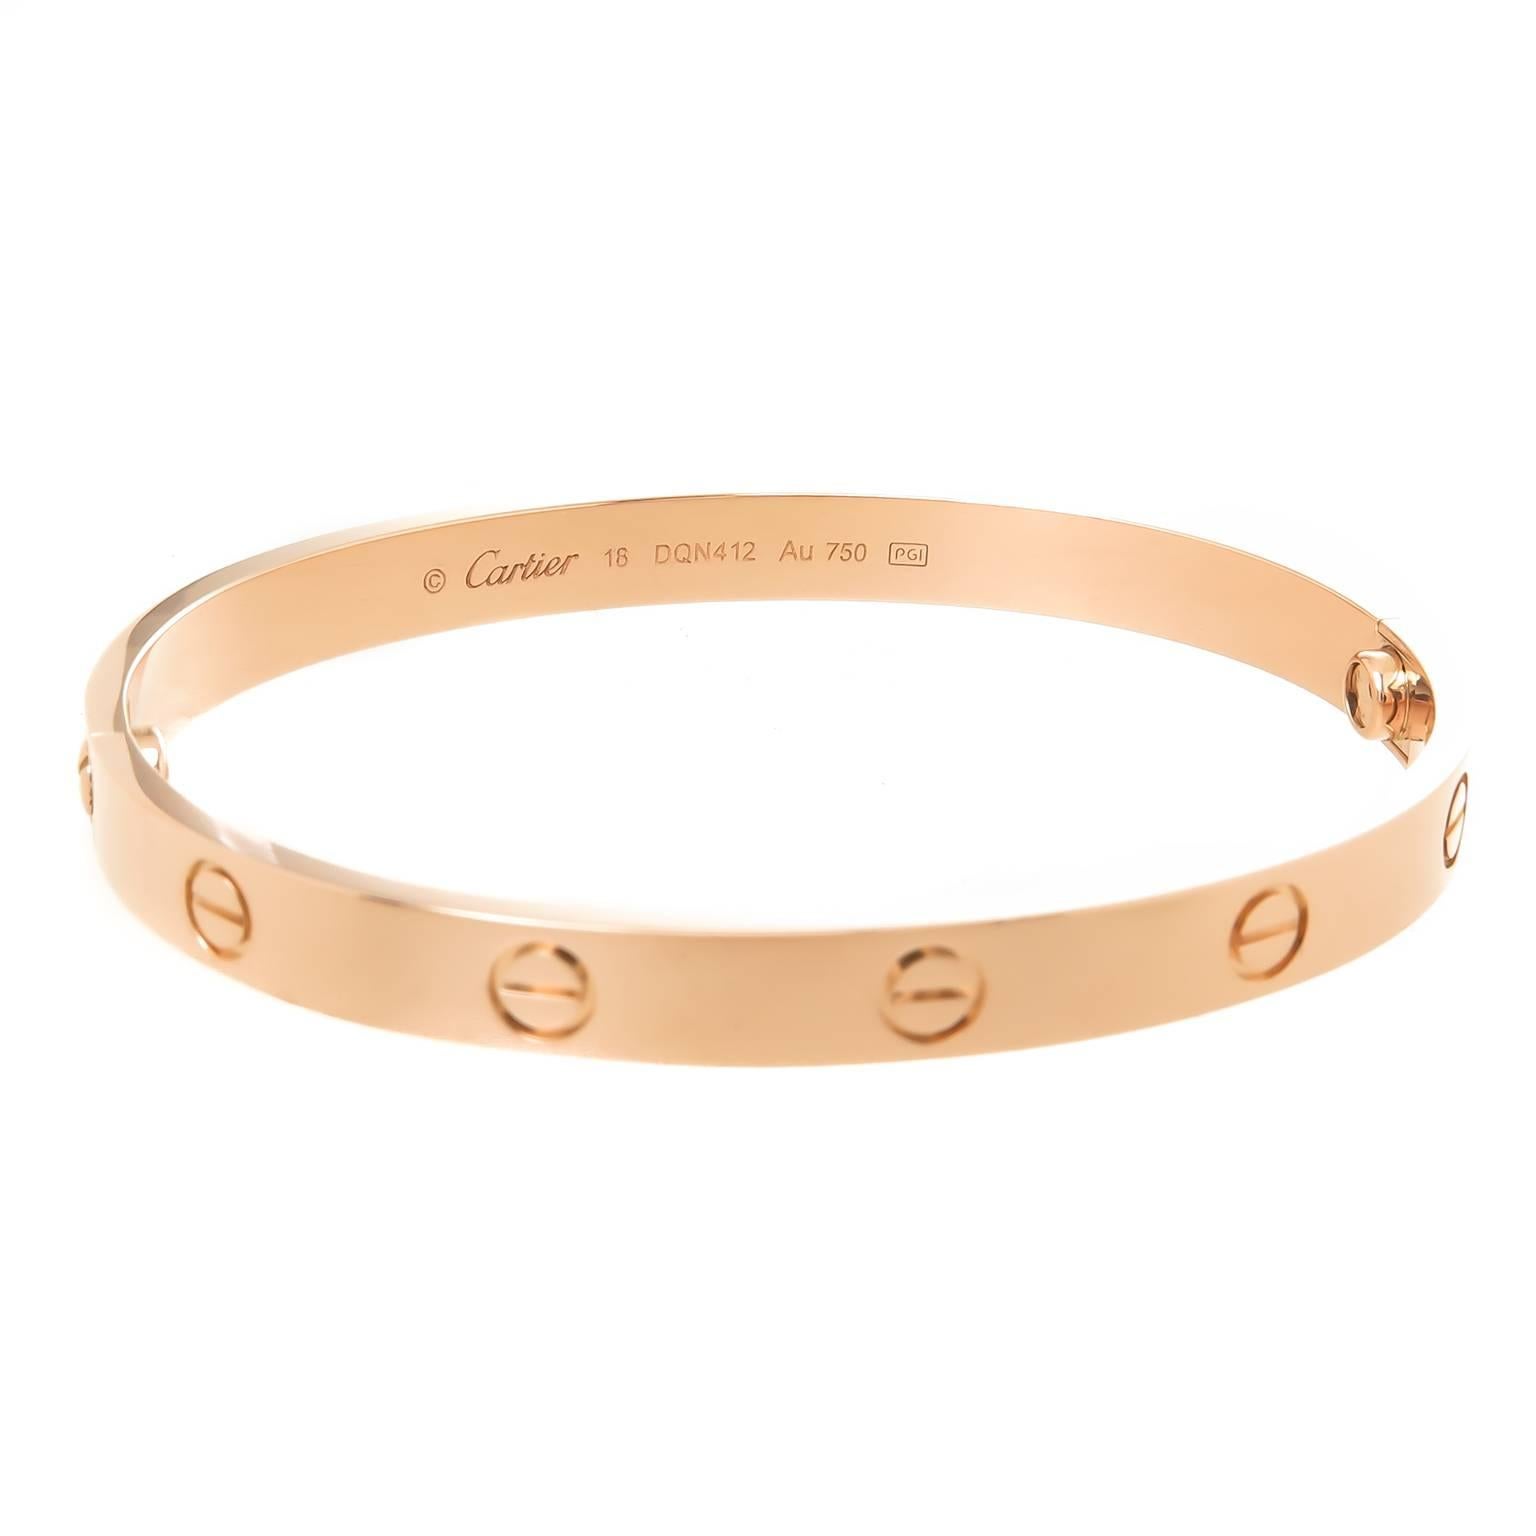 Circa 2016 Cartier 18K Rose Gold size 18 Love Bracelet, this is complete with Presentation box, outer box, certificate, paperwork Etc. Just as it was purchased 1 year ago and worn only one time. 